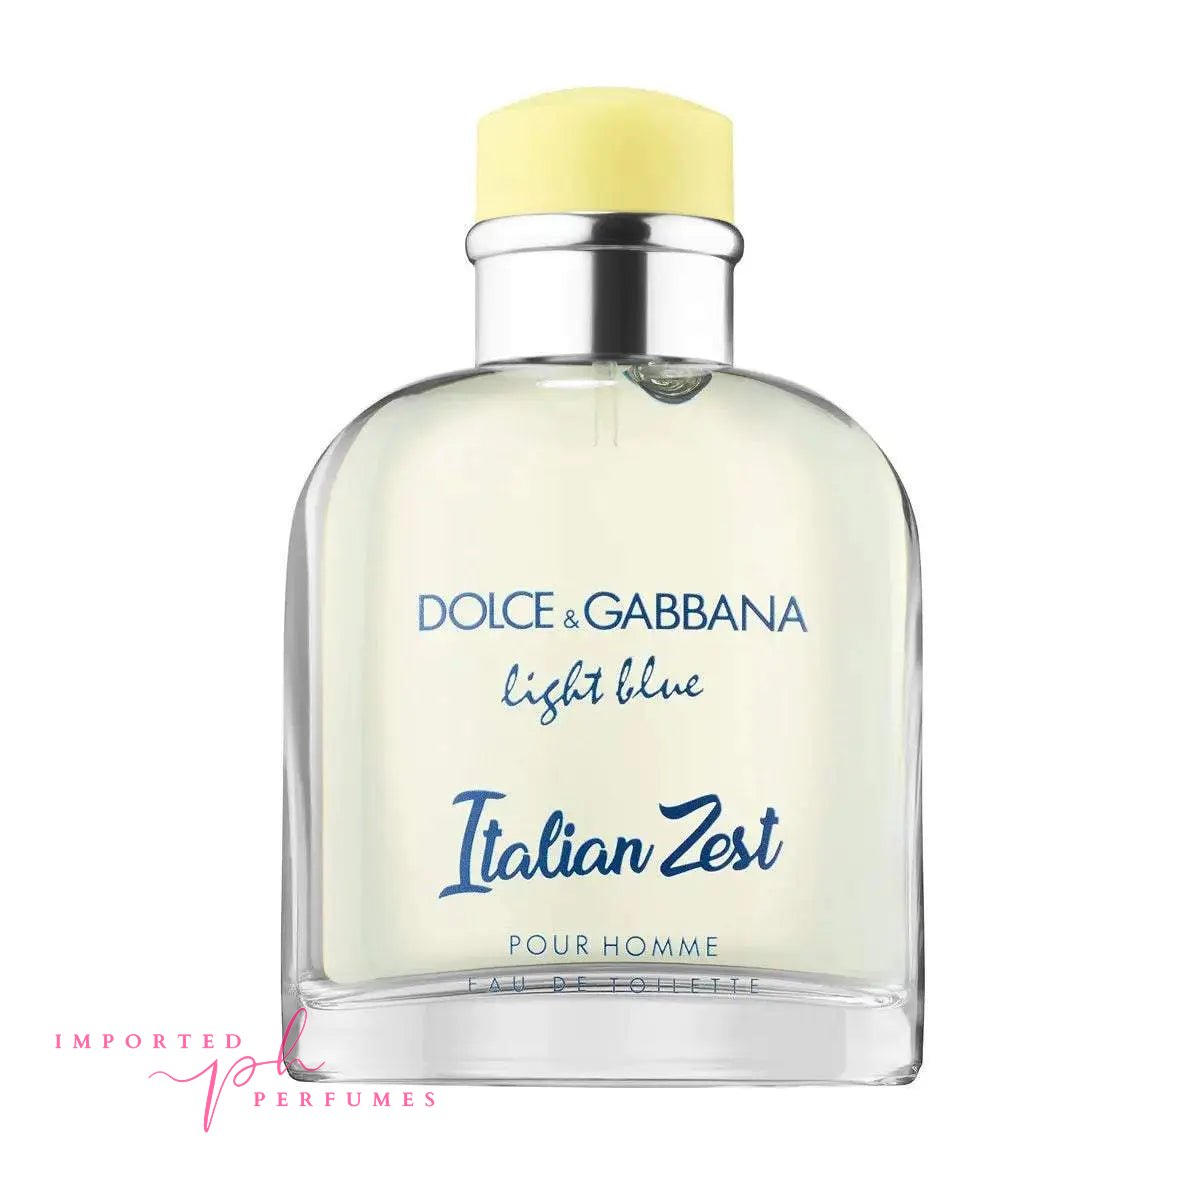 [TESTER] Dolce and Gabbana Light Blue Italian Zest Pour Homme 125ml EDT Imported Perfumes Co